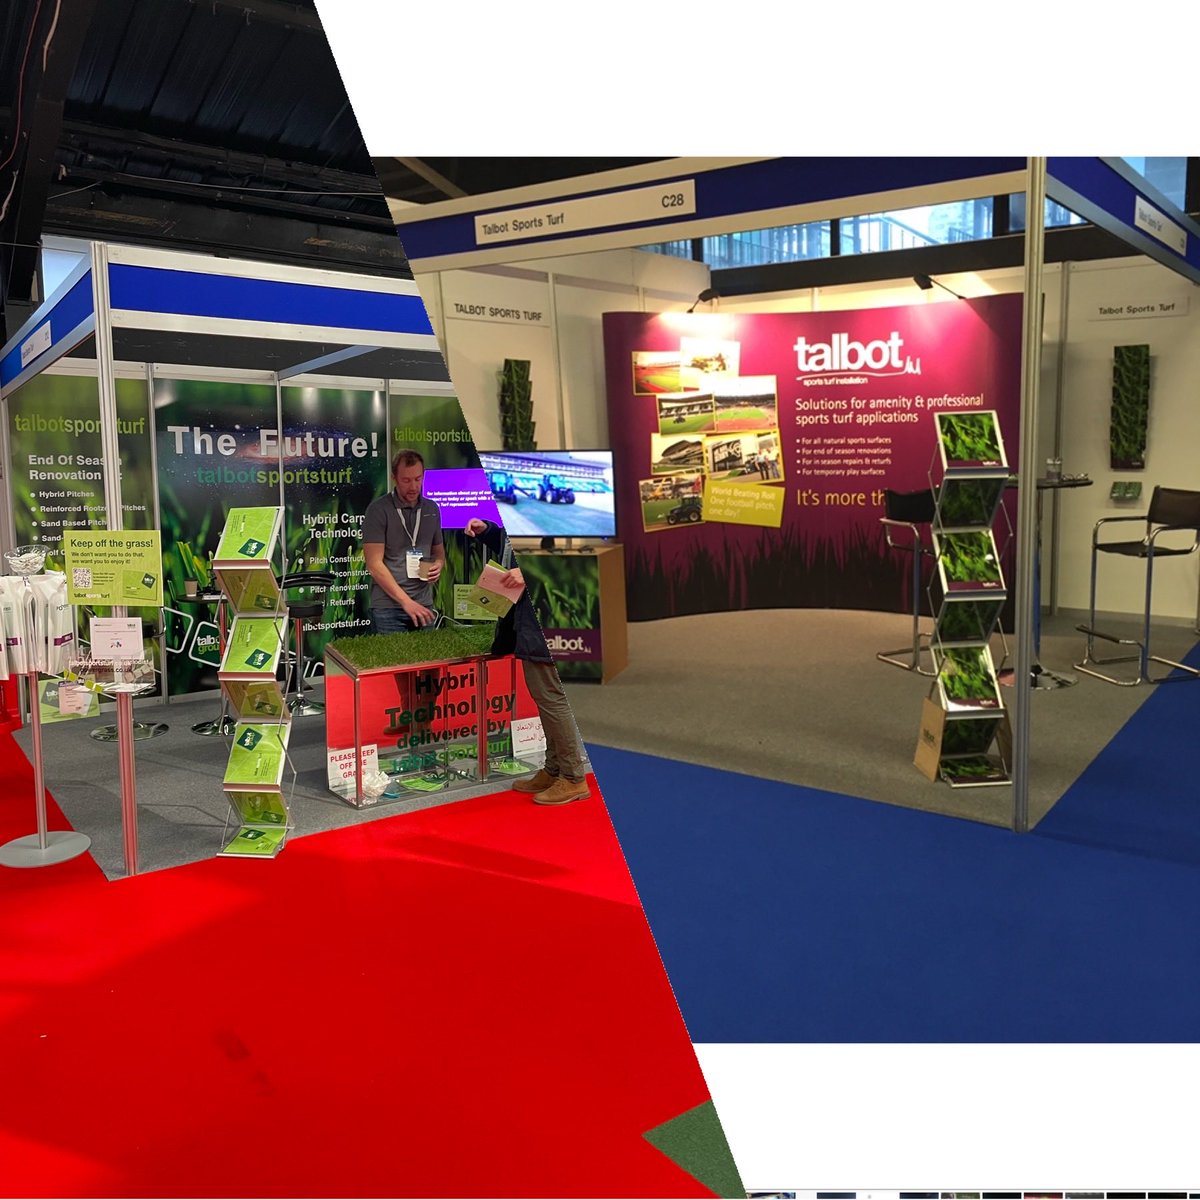 After 30 consecutive years exhibiting ⁦@BIGGALtd⁩ #harrogate the 2024 show comes to an end , thanks to all who visited our stand ⁦@TalbotLandscape⁩ ⁦@Talbot_Ed⁩ ⁦@TurfBusiness⁩ ⁦@TurfMatters⁩ #naturalgrass ⚽️⛳️🏈🍺😊 see you all soon.